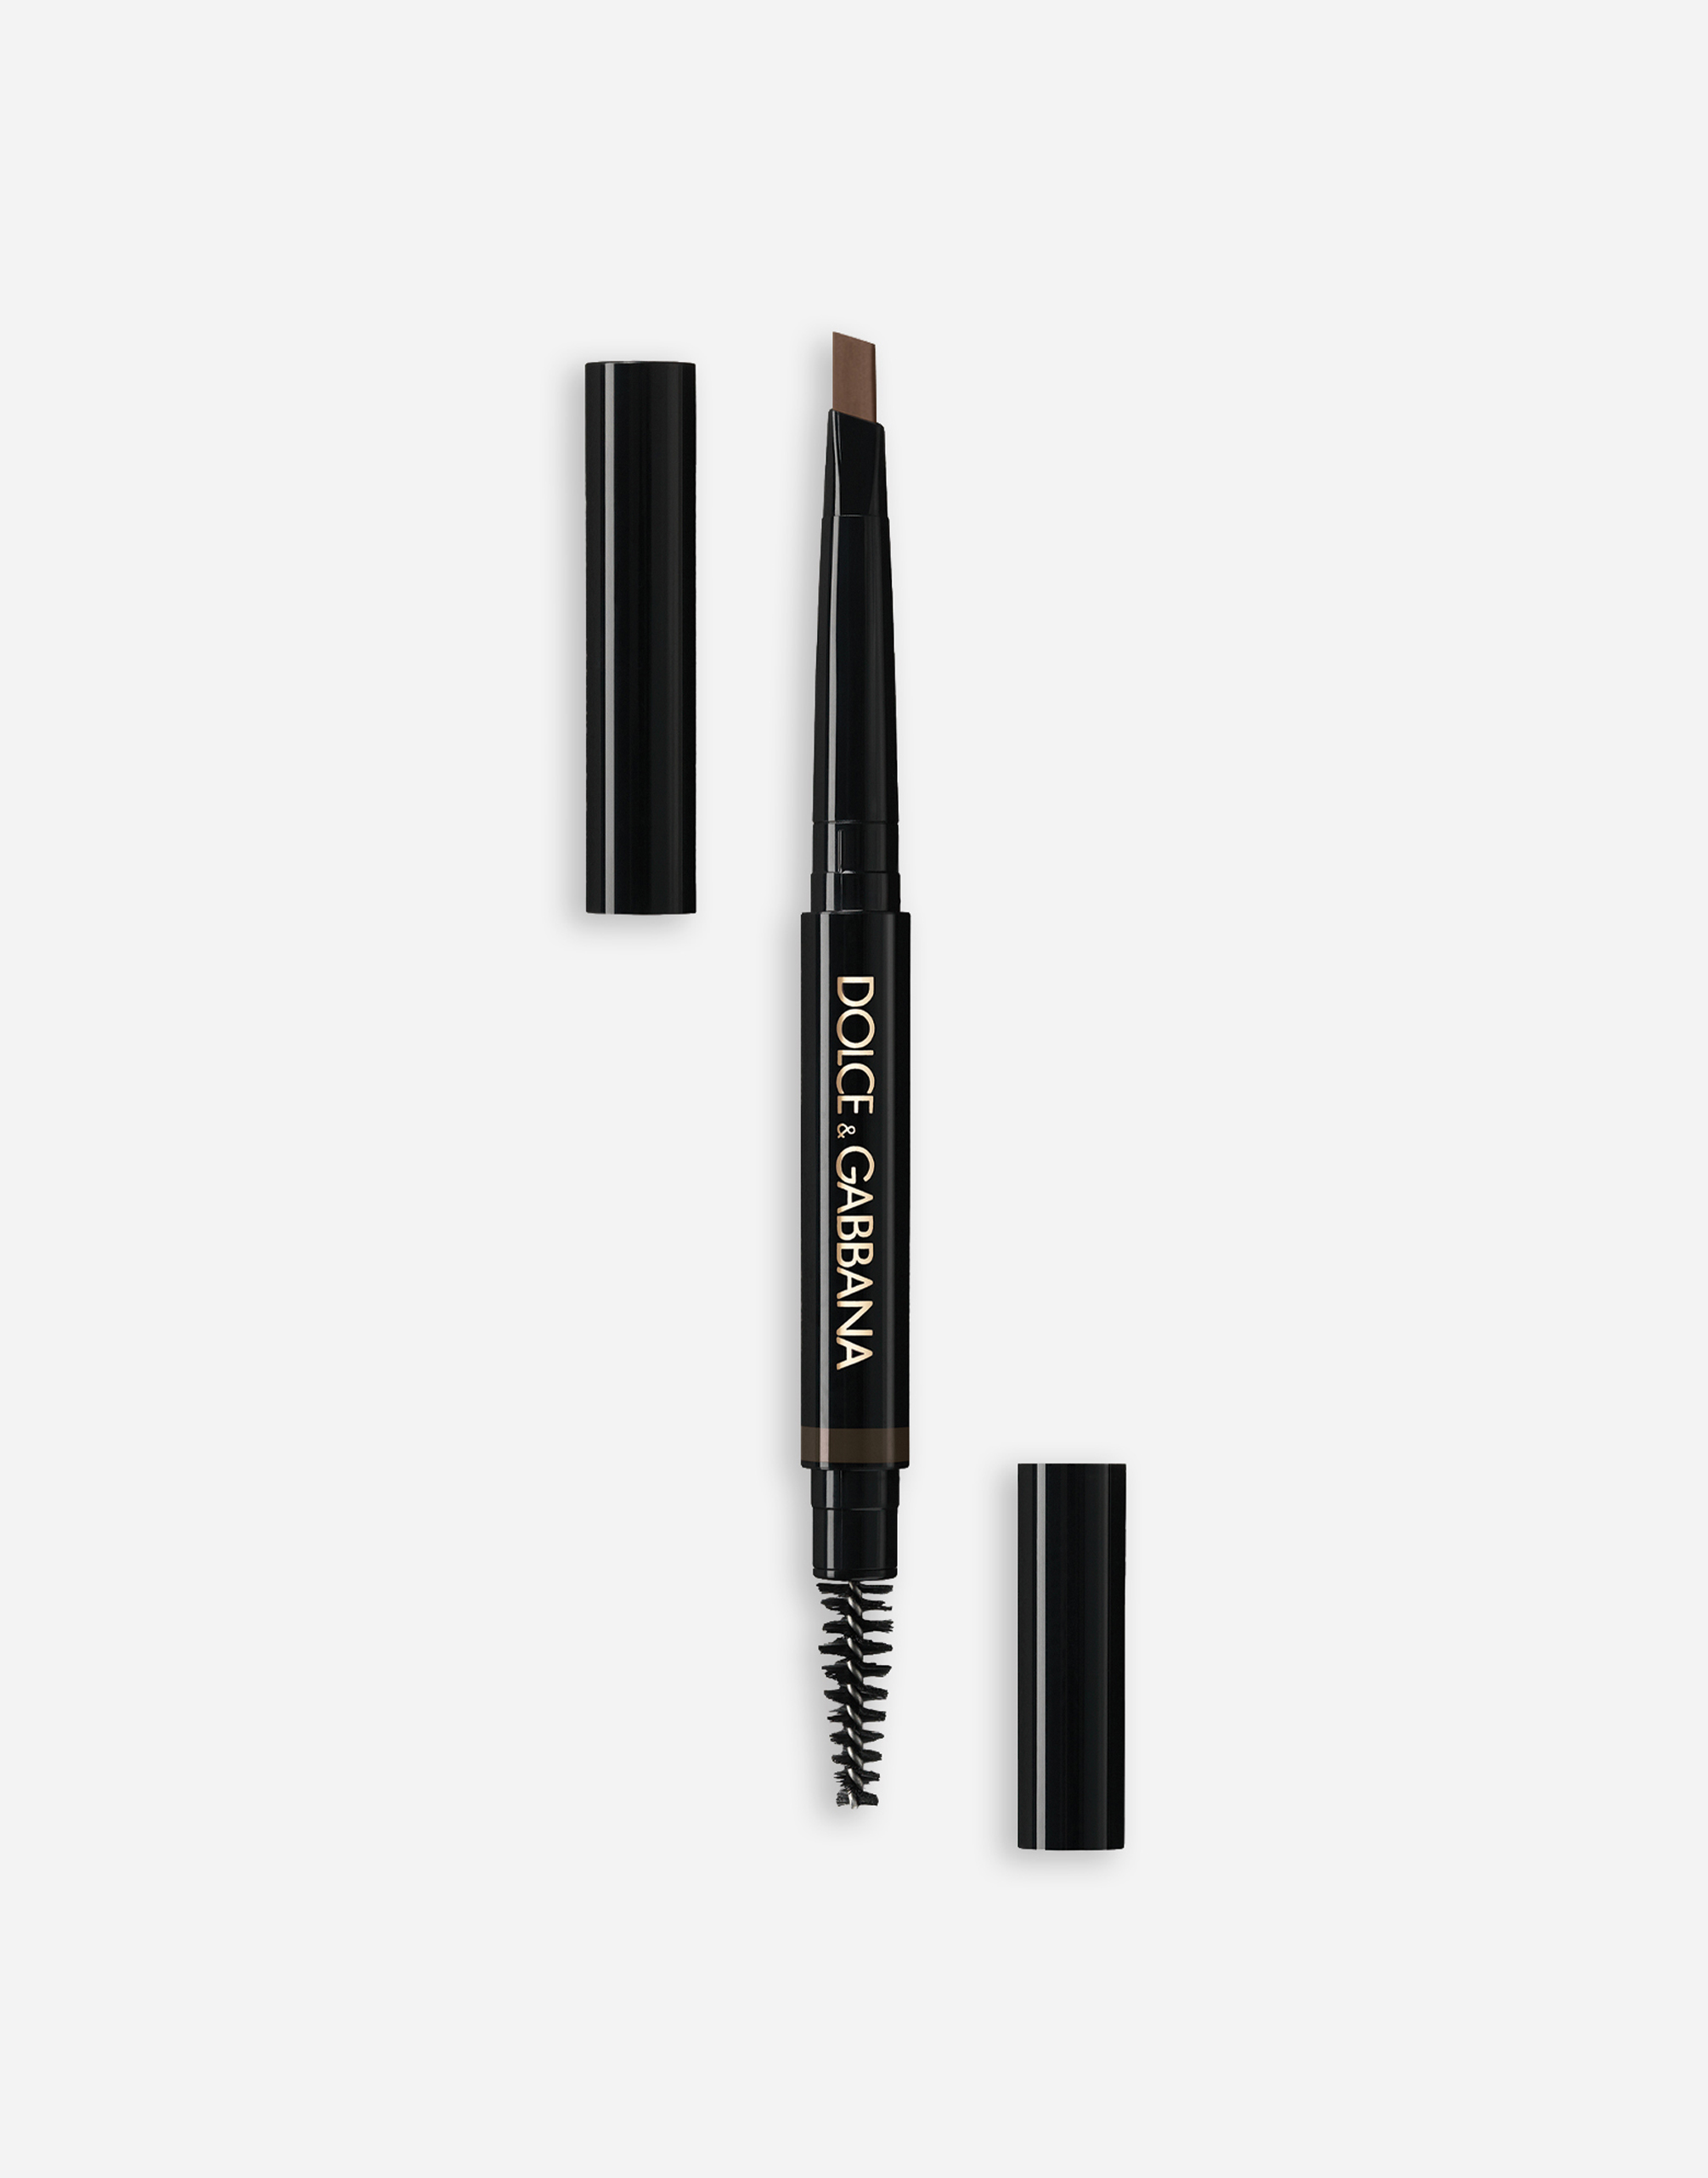 Dolce & Gabbana The Brow Liner In Chestnut 2